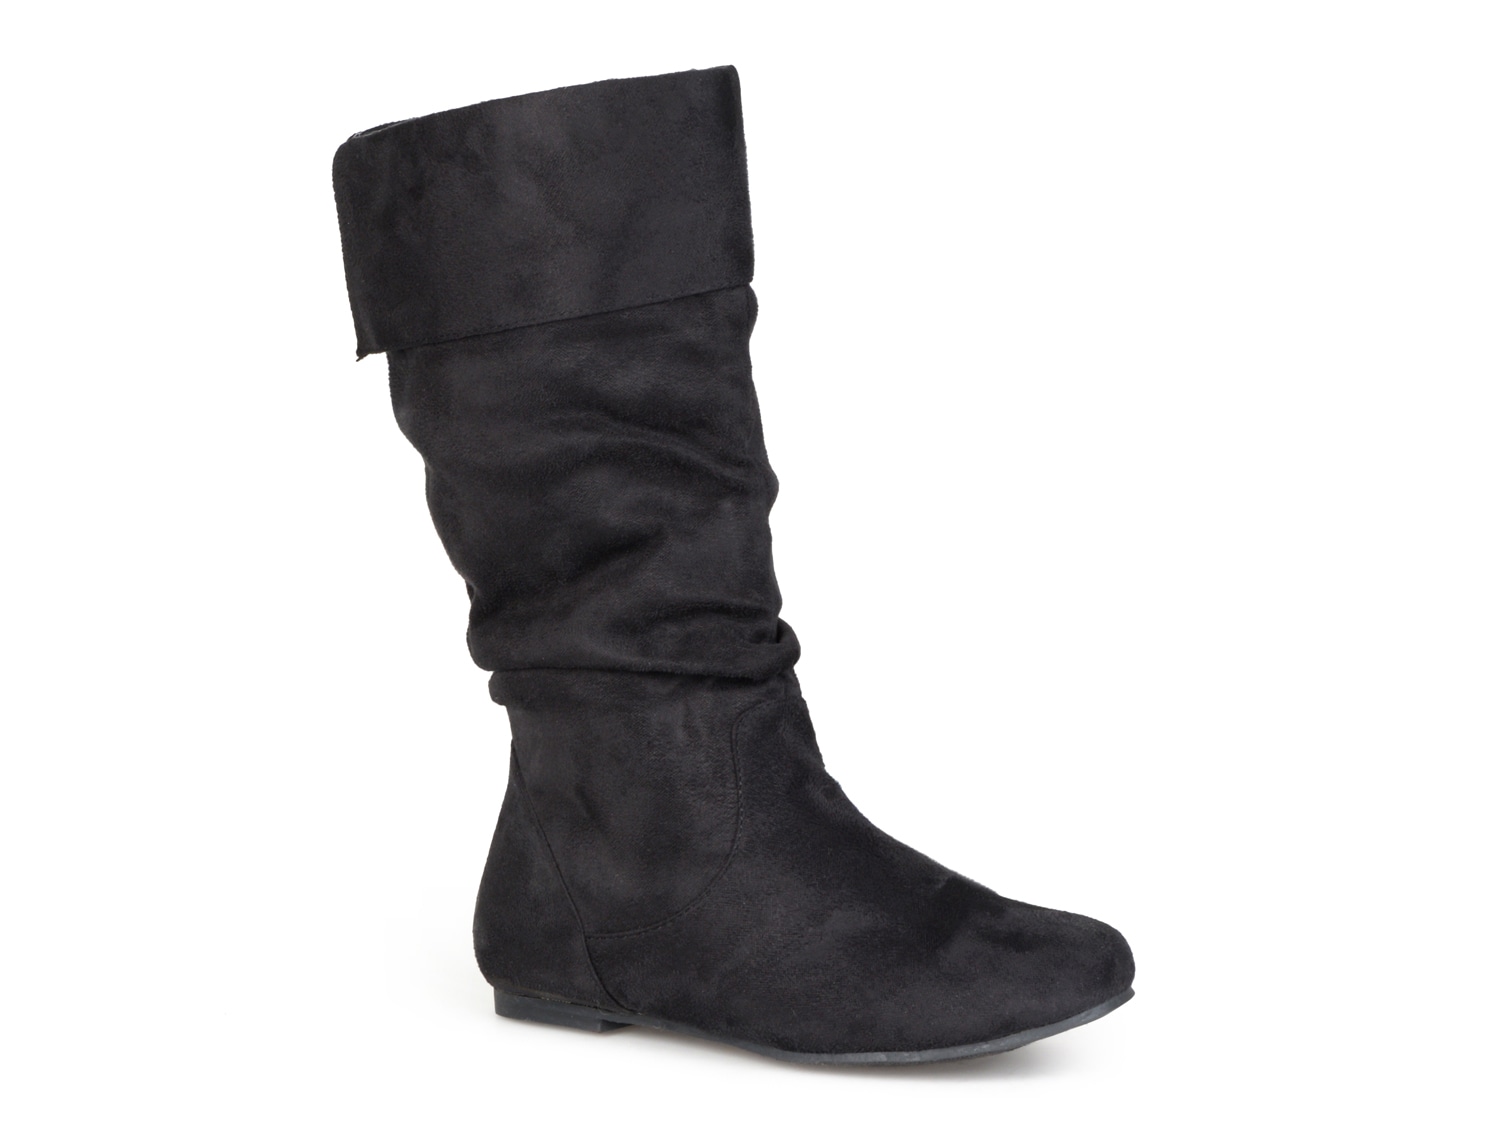 Journee Collection Shelley-3 Boot - Free Shipping | DSW